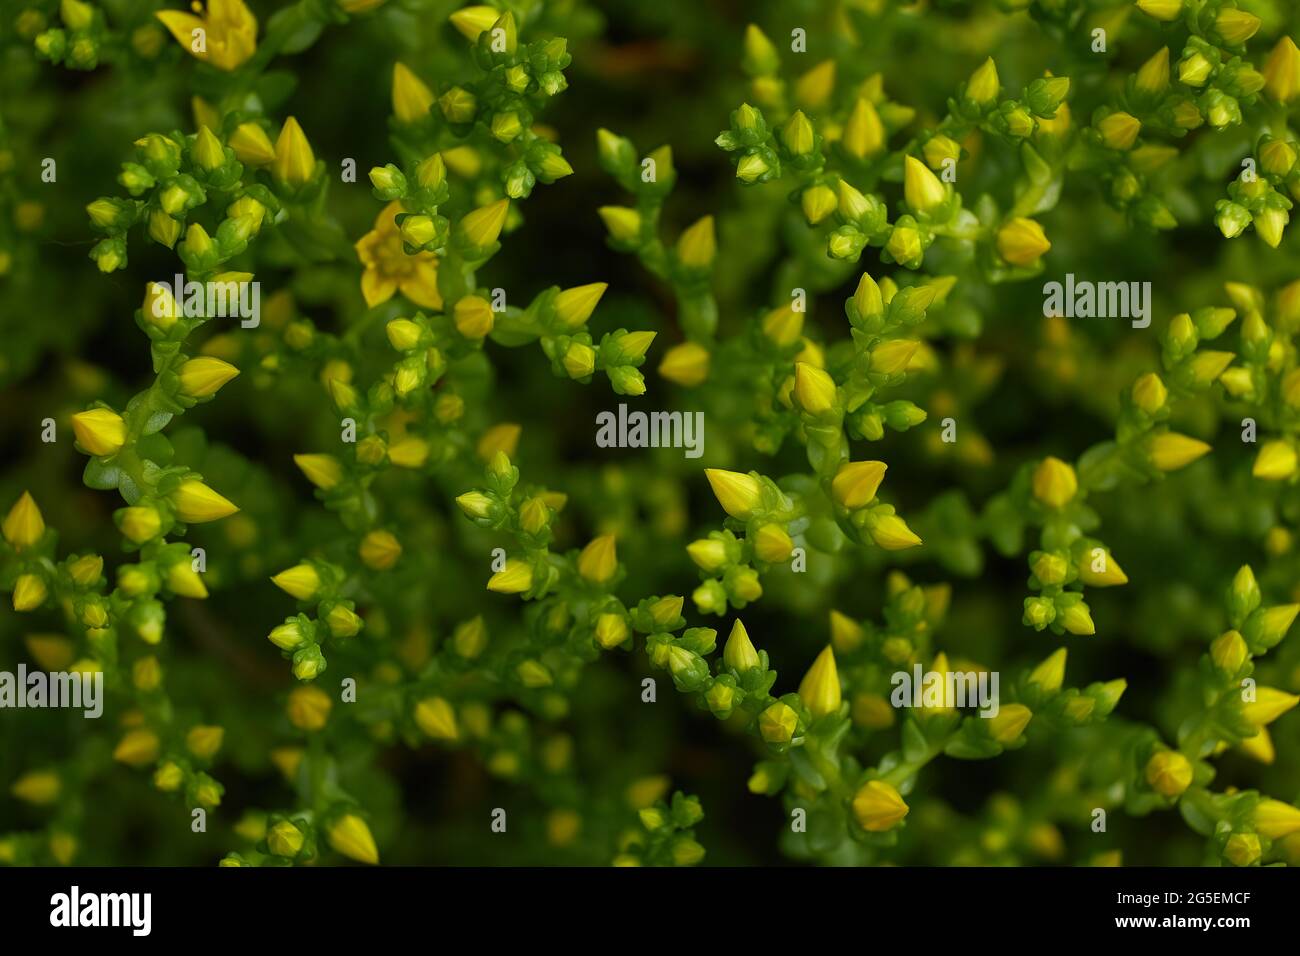 Flower plant saxifrage during summer flowering. Beautiful yellow flower Stock Photo